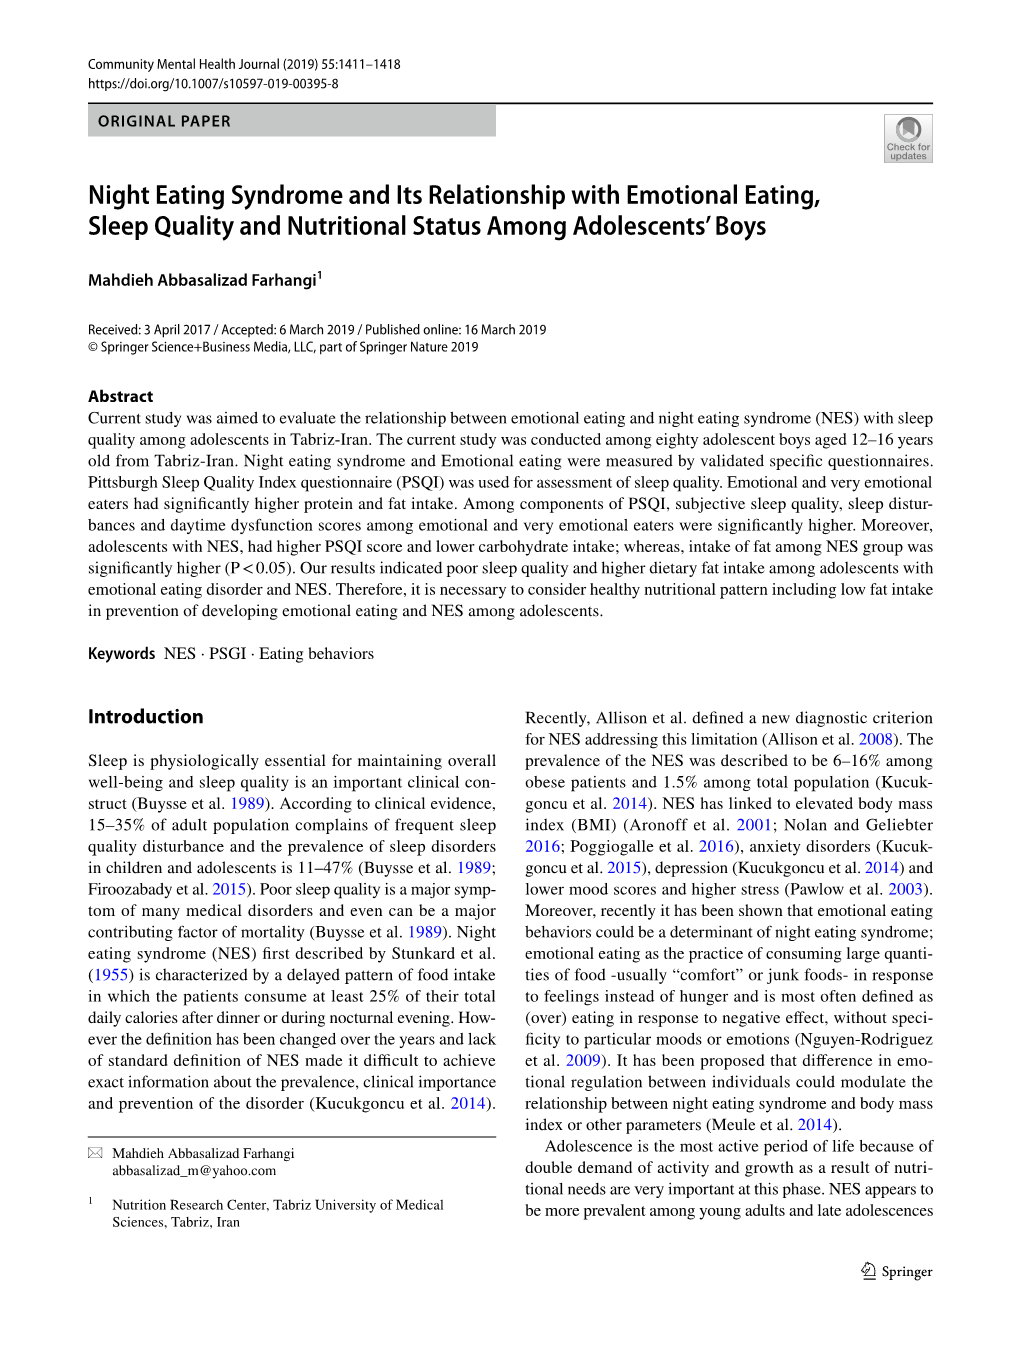 Night Eating Syndrome and Its Relationship with Emotional Eating, Sleep Quality and Nutritional Status Among Adolescents' Boys